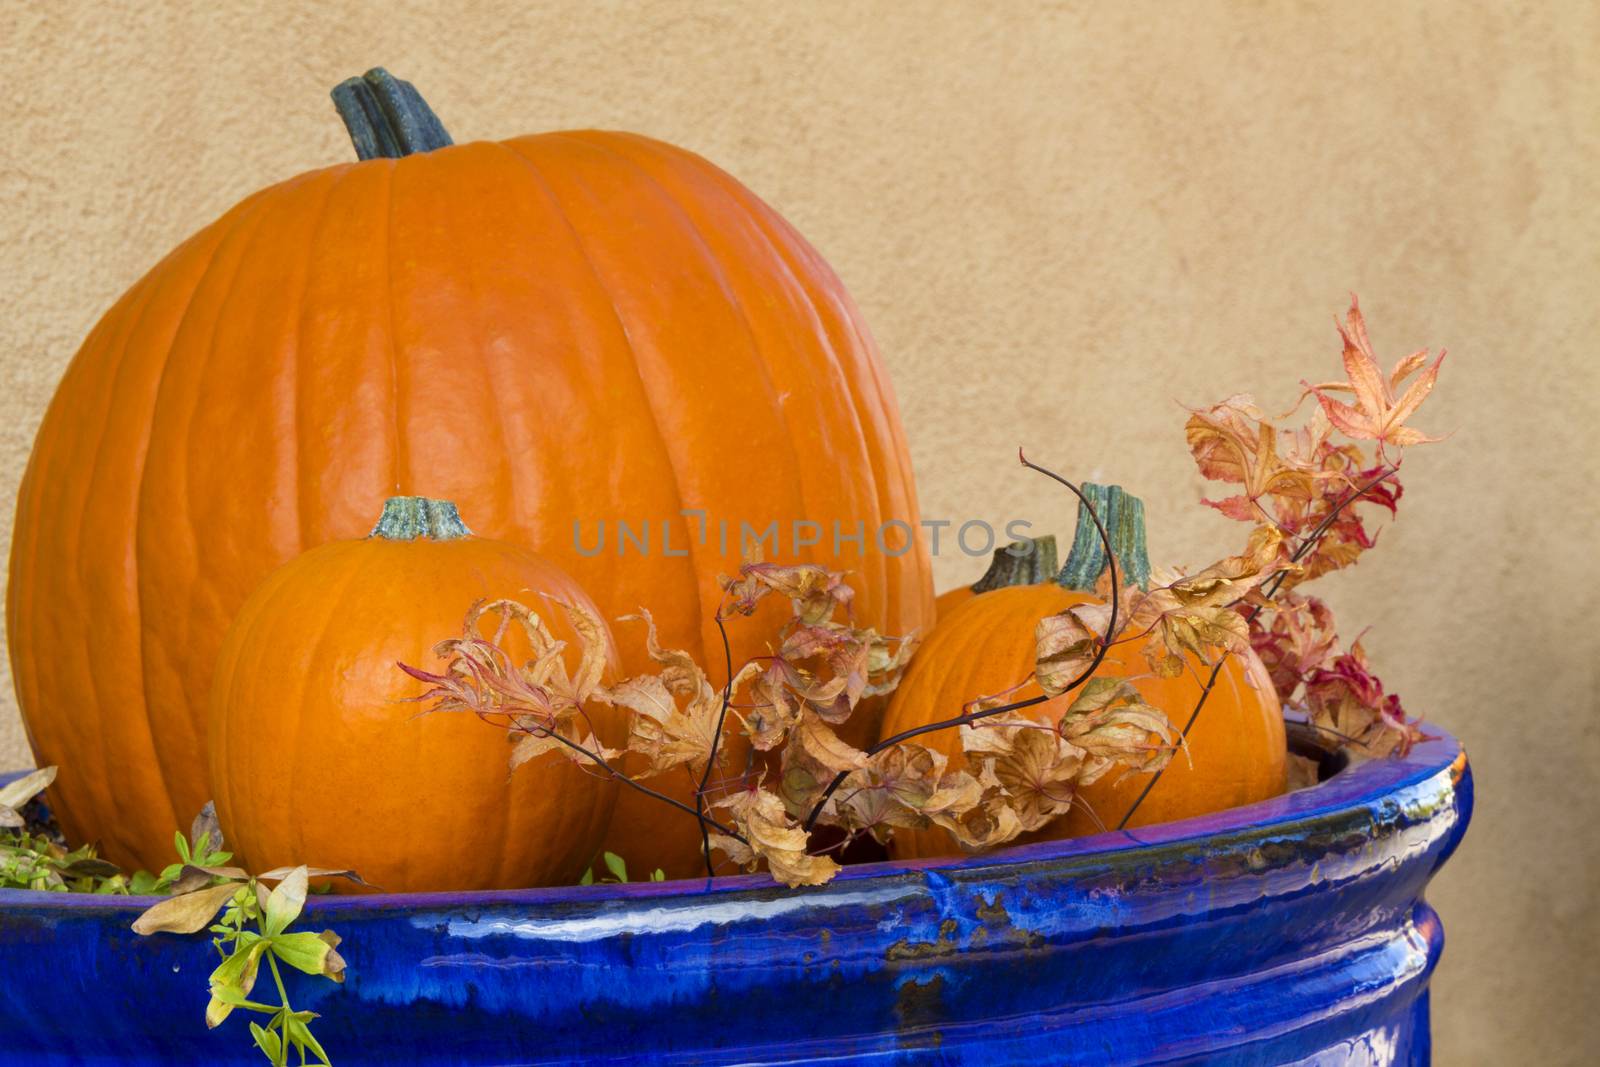 Blue planter displays pumpkins and dry leaves in autumn.  Location is in Santa Fe, New Mexico, in October.  Copy space on plain stucco wall. 